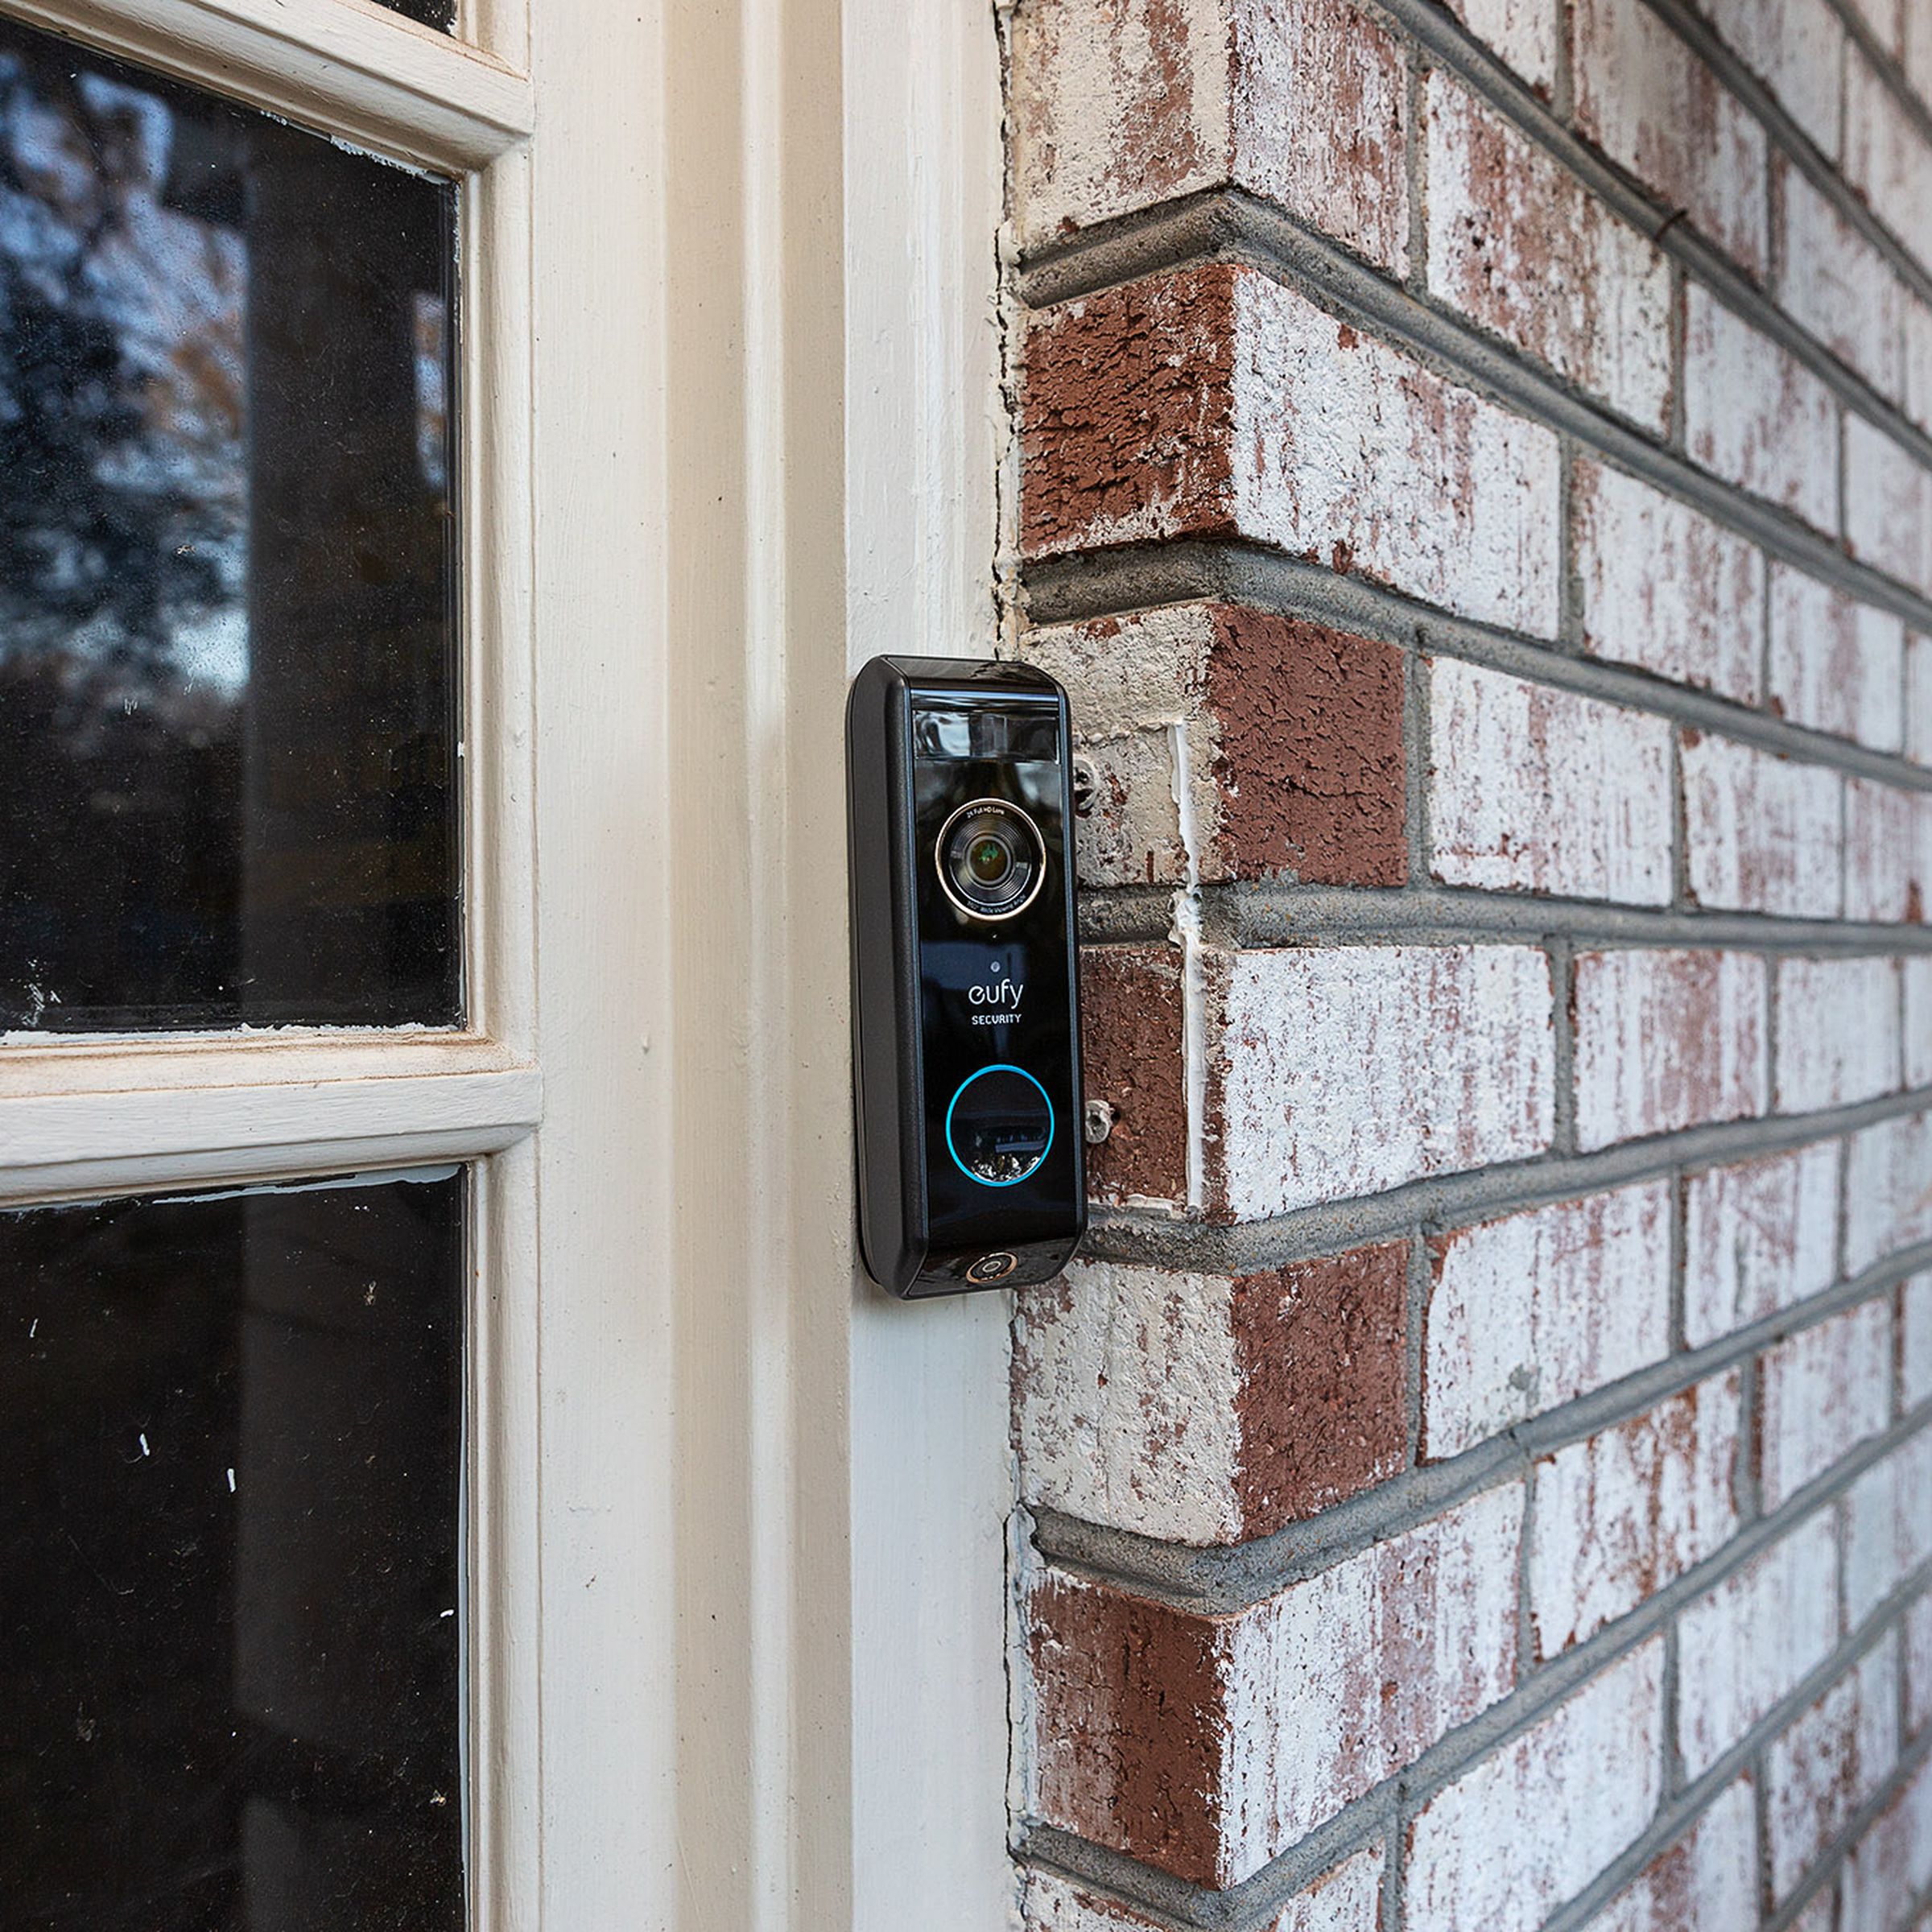 The Eufy Dual video doorbell has two cameras to capture all the action at your front door.